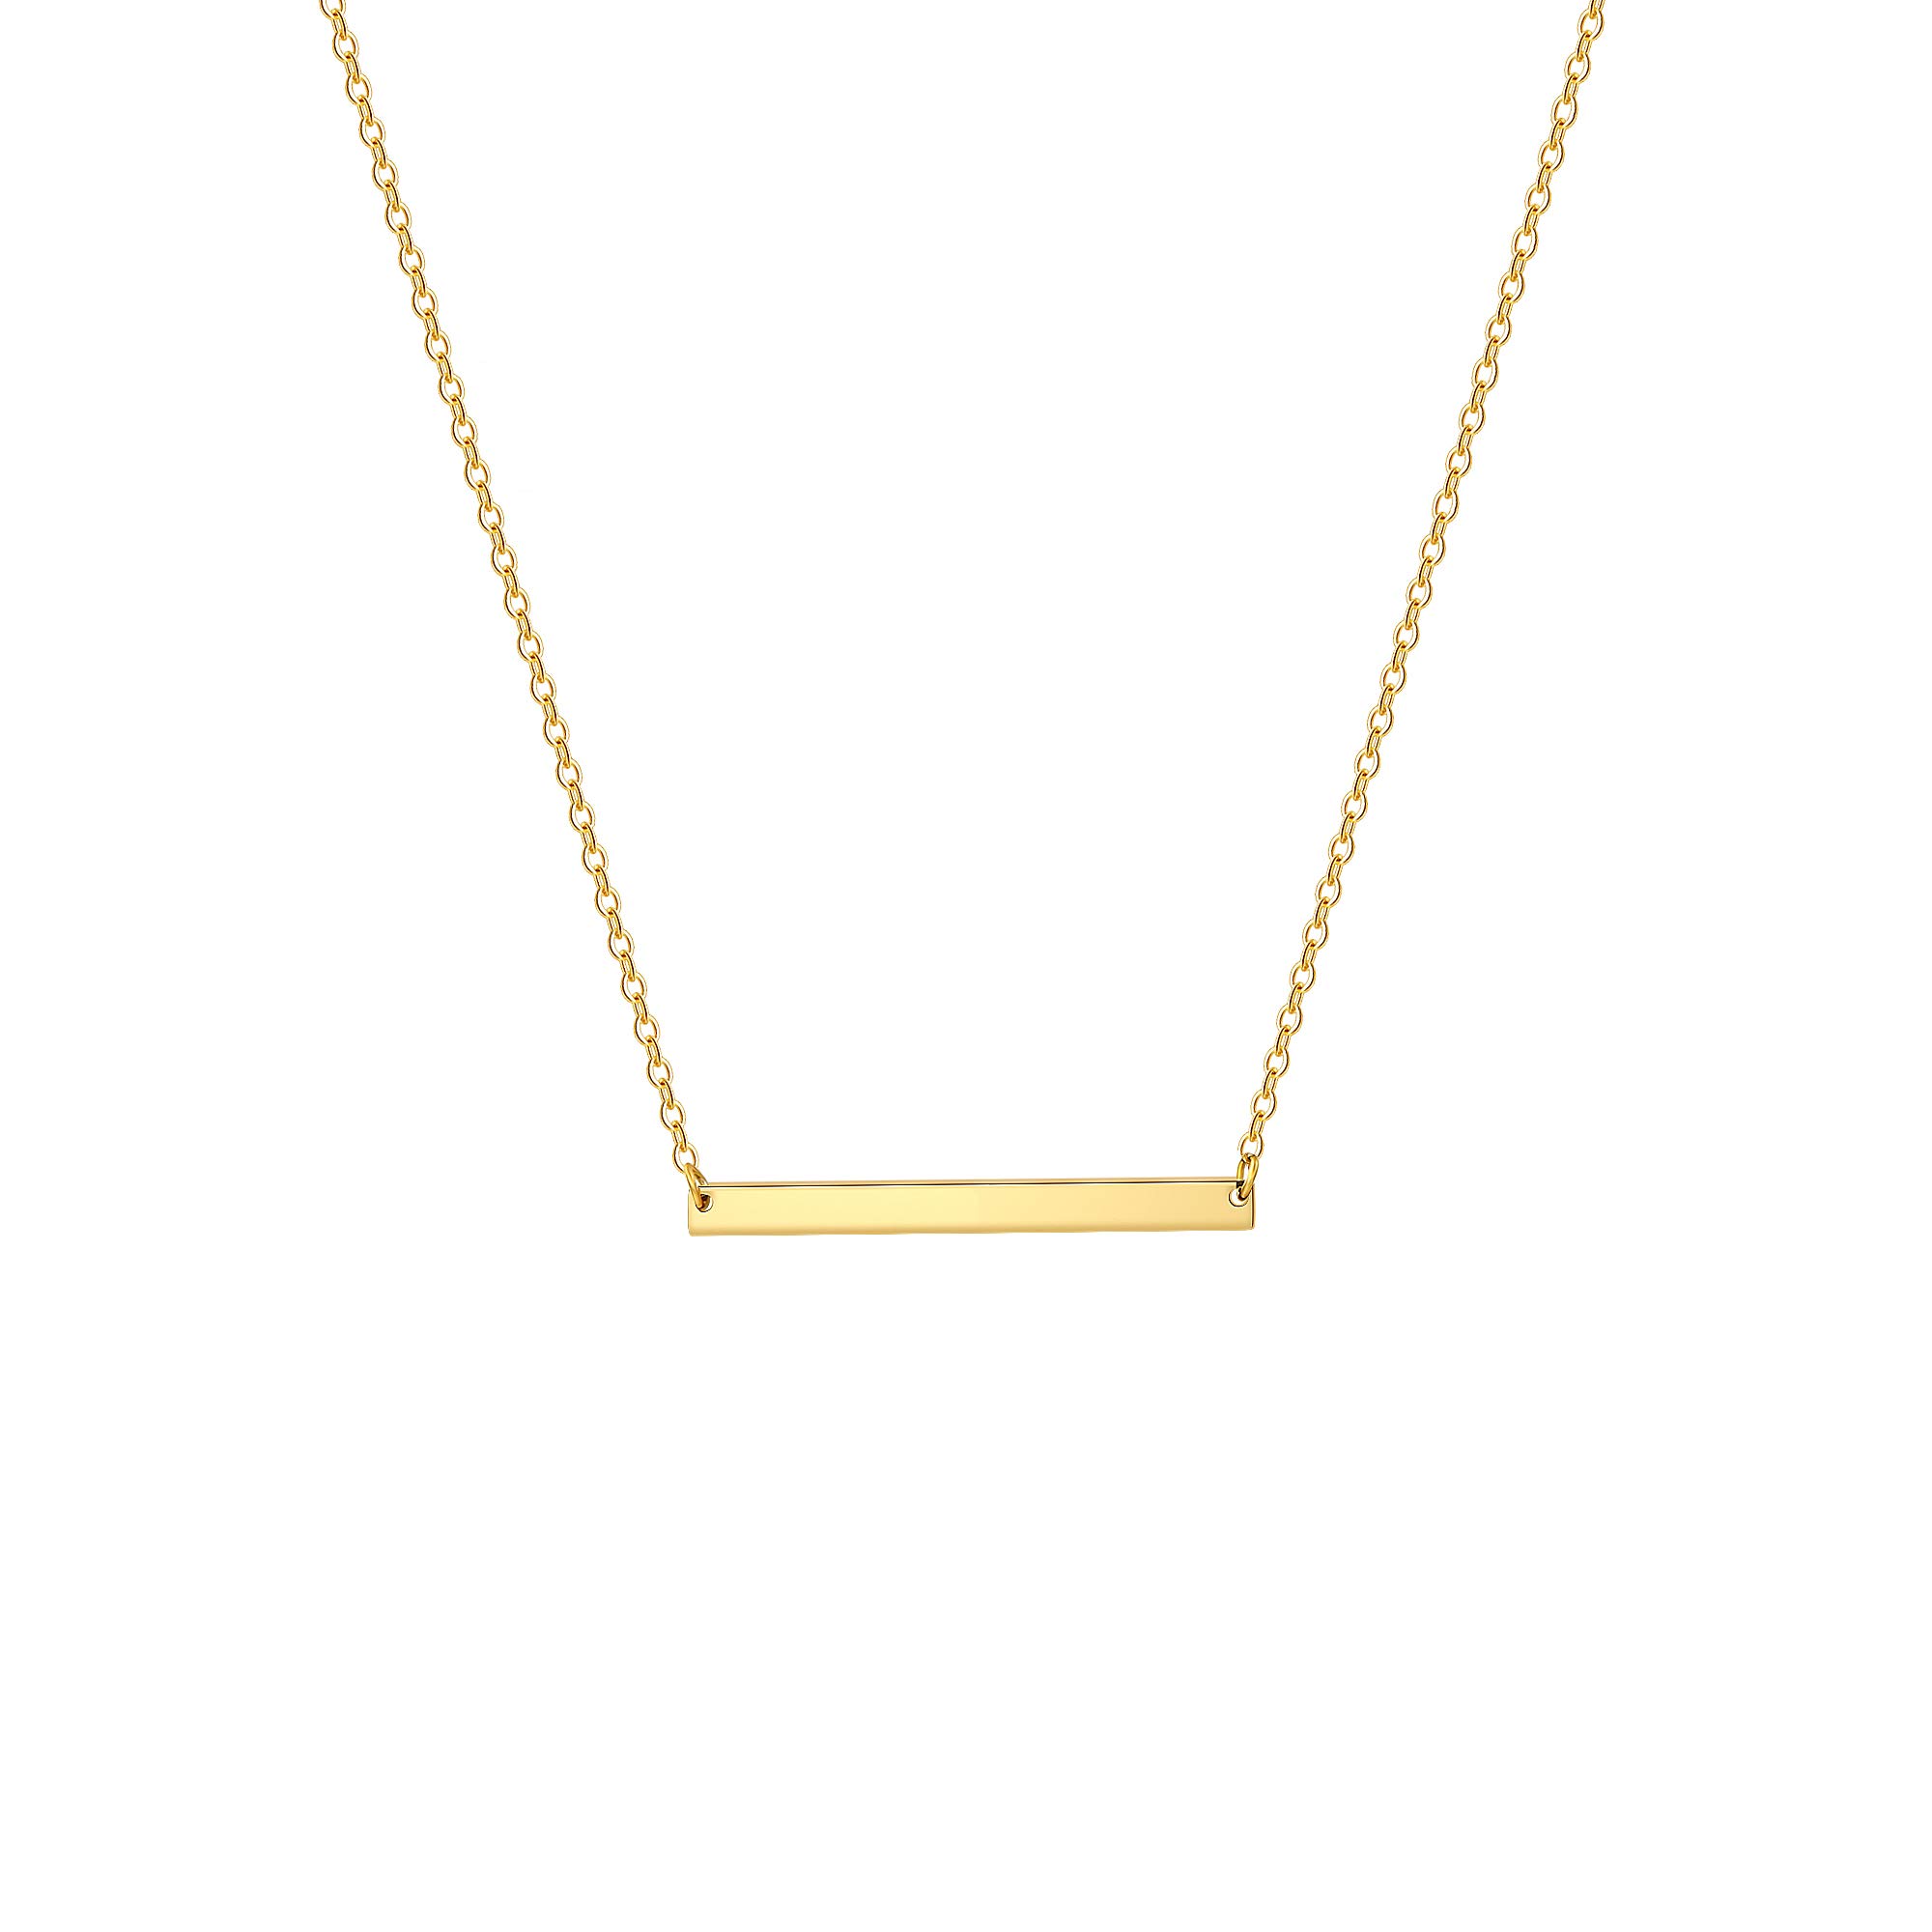 Estendly Simple Gold Bar Necklace Womens Delicate Handmade Gifts for Teen